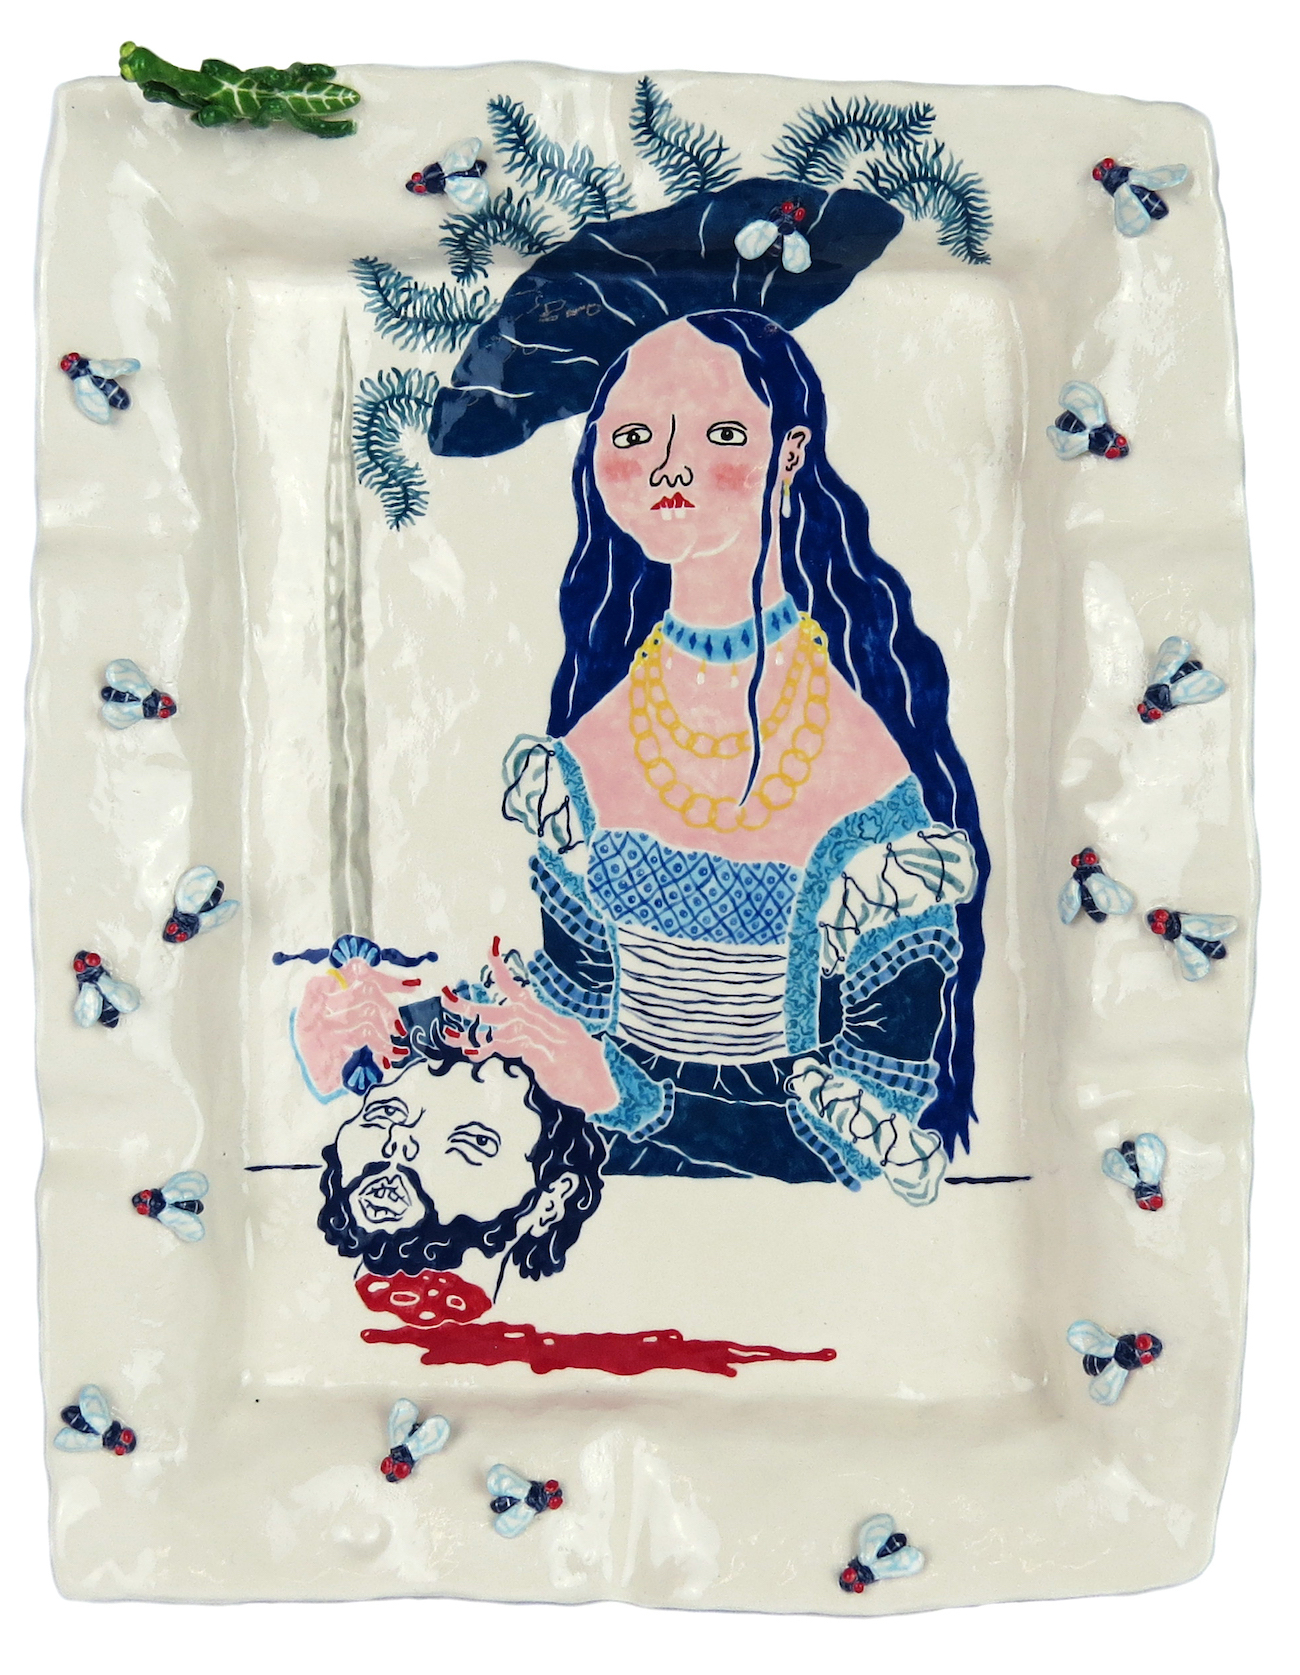 © Katy Stubbs, Judith with the Head of Holofernes, 2018